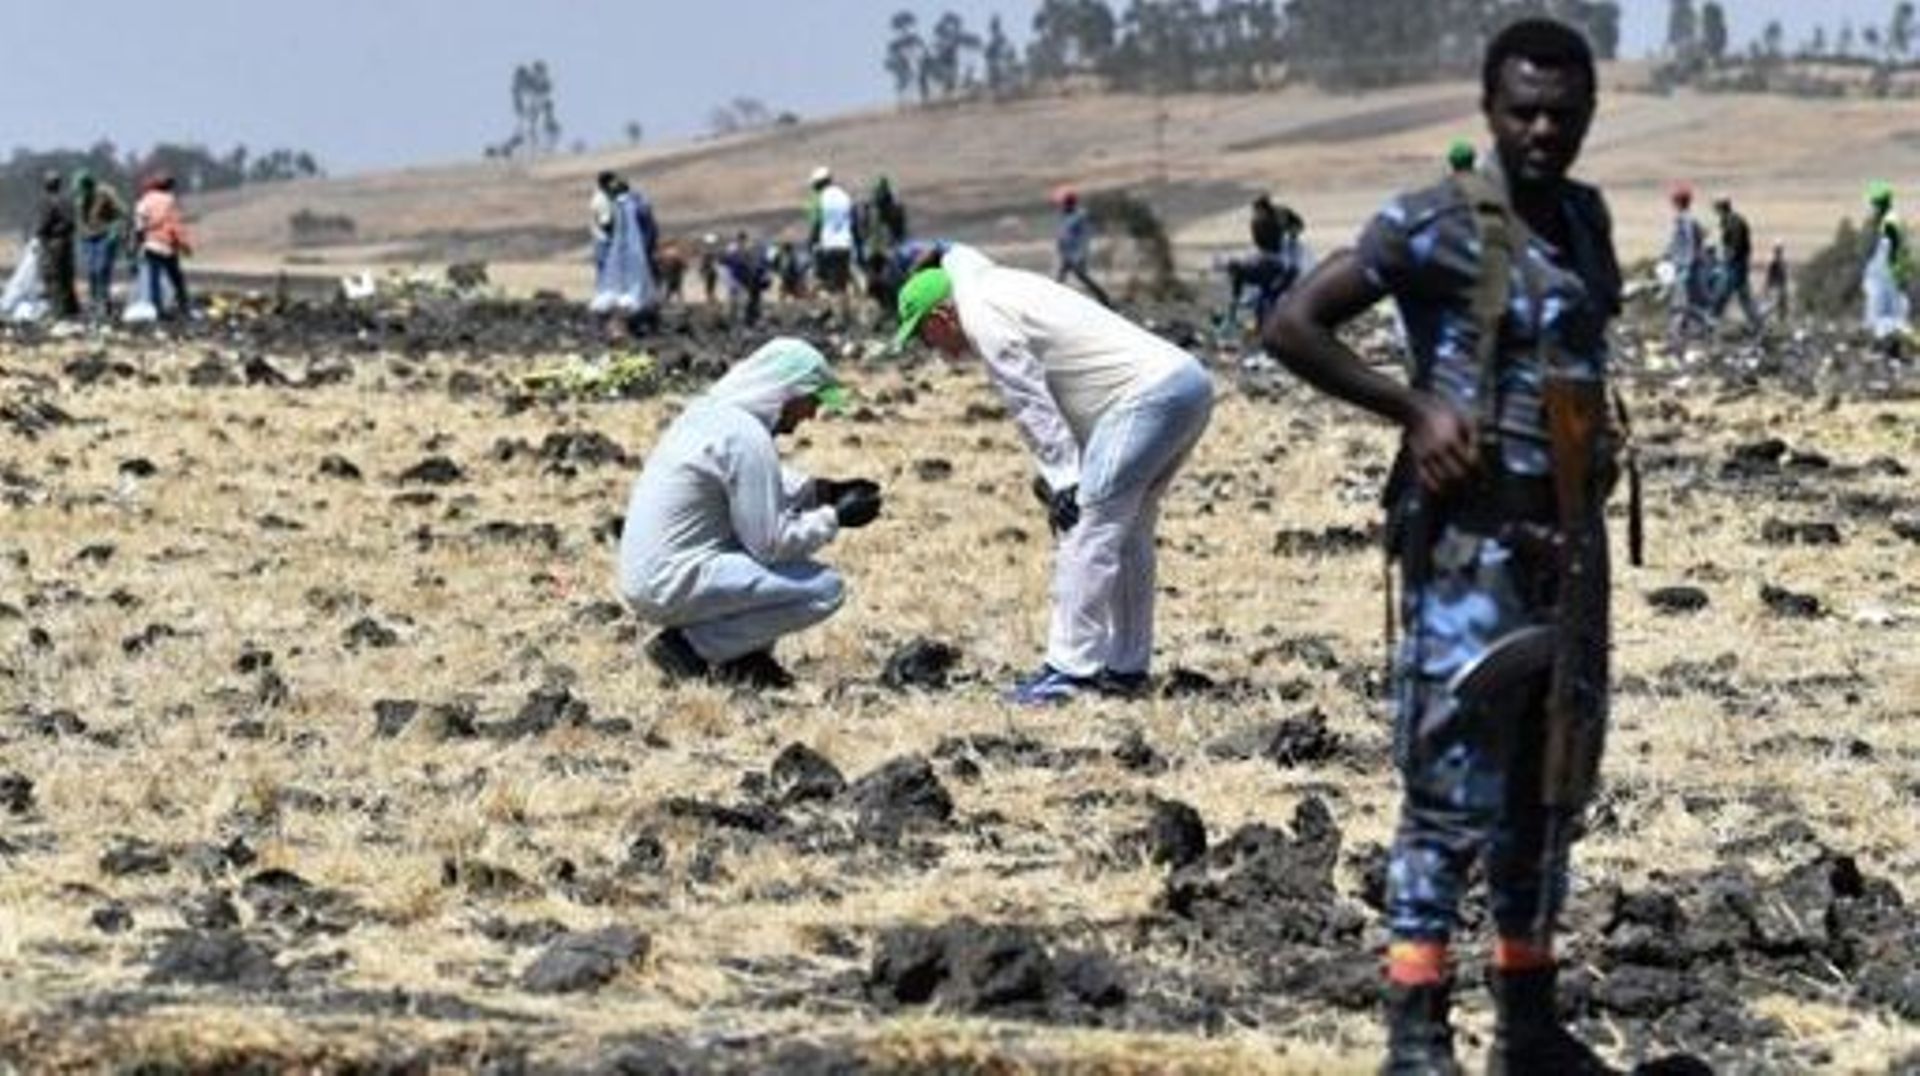 Forensic experts work at the crash site of the Ethiopian Airlines operated Boeing 737 MAX aircraft, at Hama Quntushele village in the Oromia region, on March 13, 2019. A Nairobi-bound Ethiopian Airlines Boeing crashed minutes after takeoff from Addis Aba